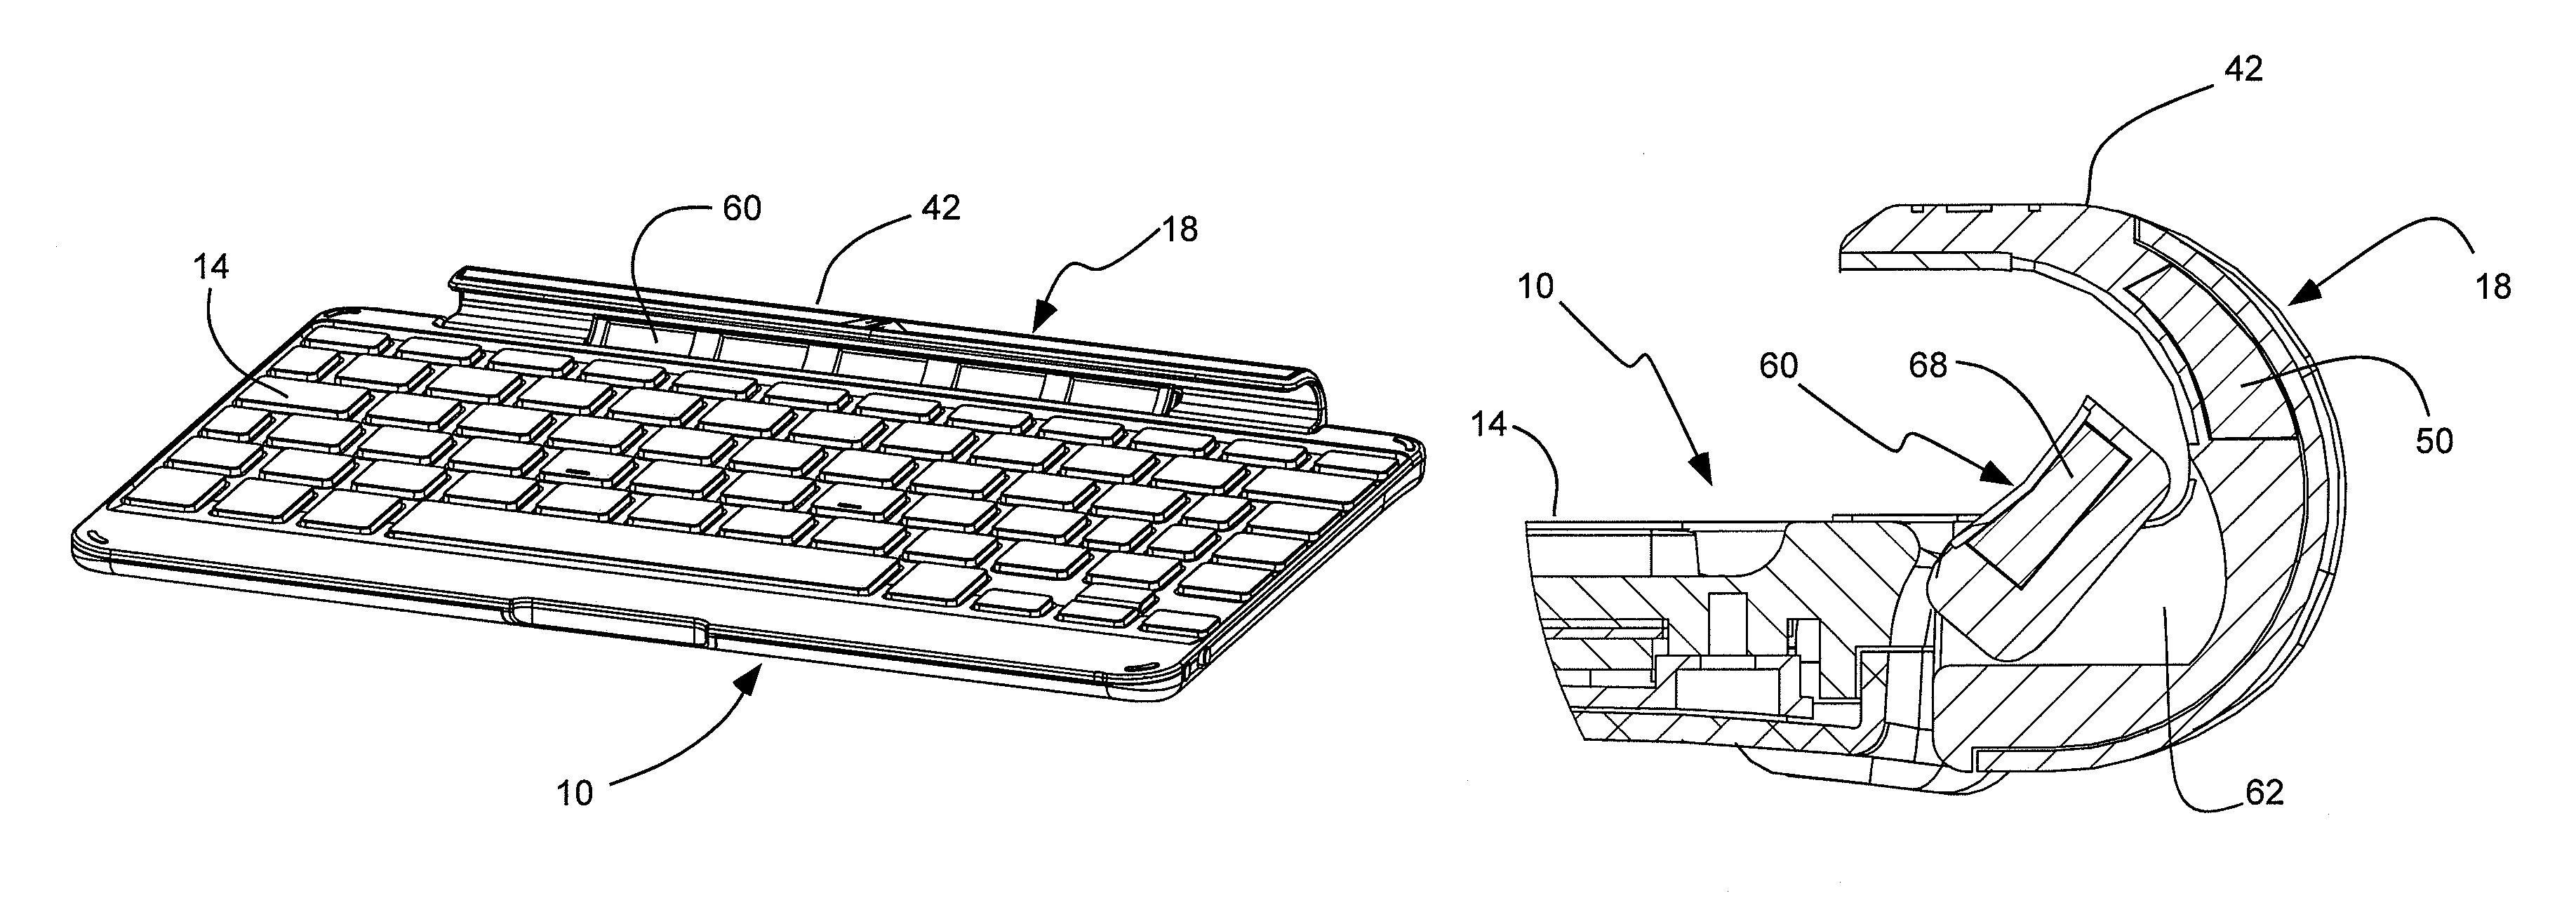 Combined cover, keyboard and stand for tablet computer with reversable connection for keyboard and reading configuration